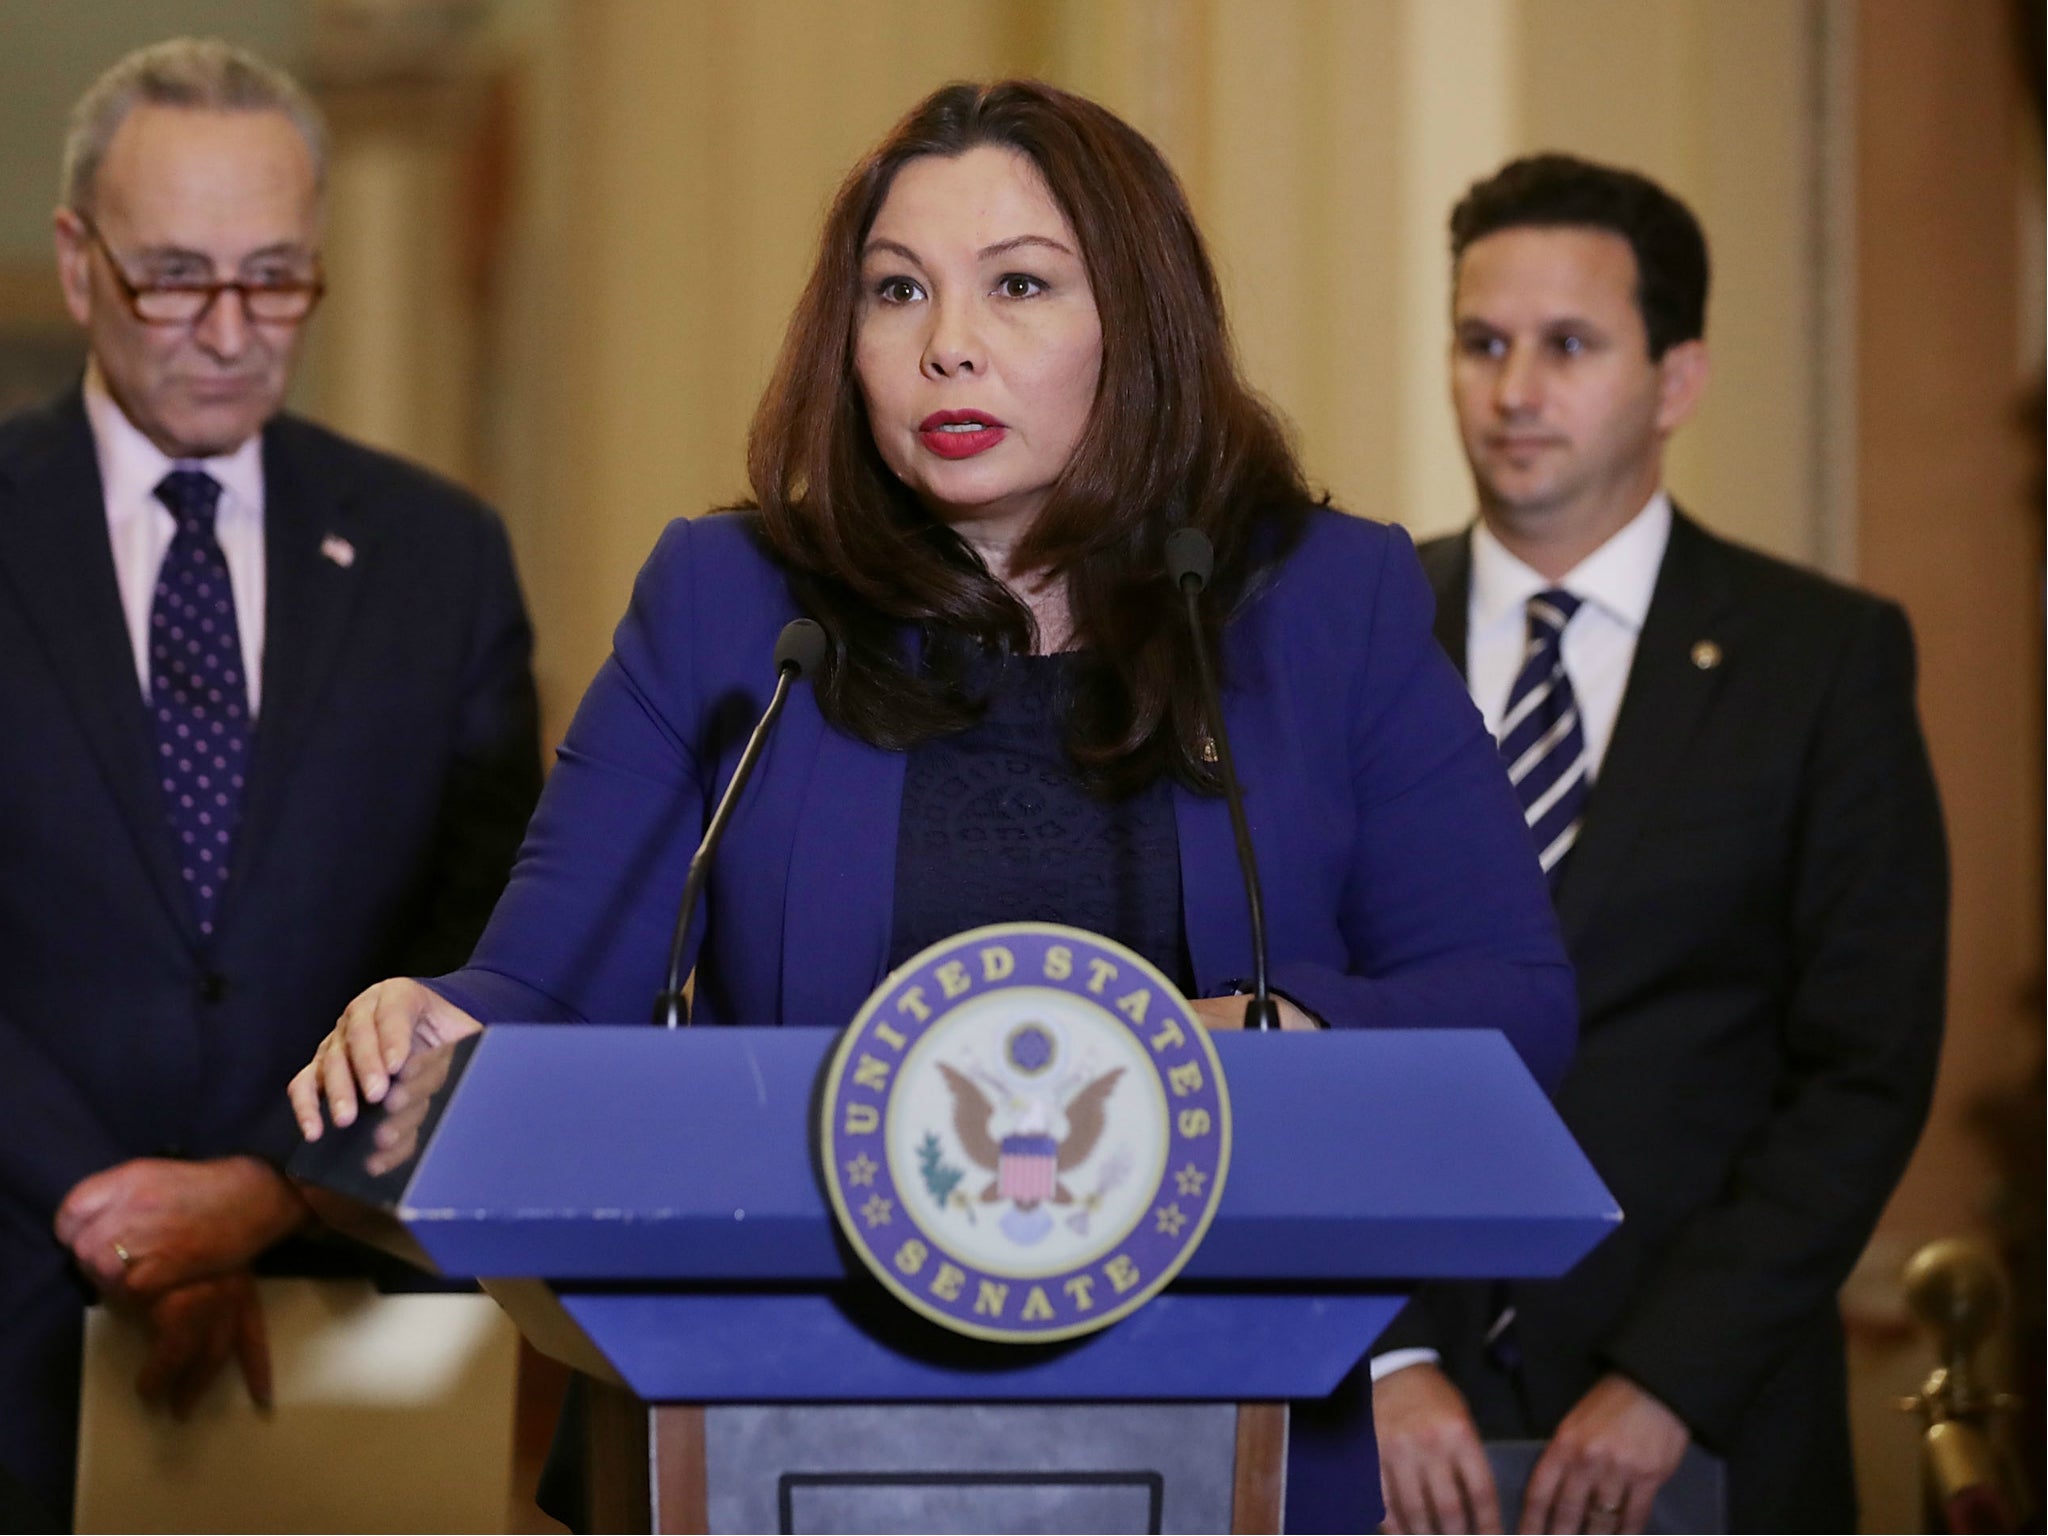 (Chip Somodevilla/Getty Images) Tammy Duckworth lost both legs while serving in Iraq